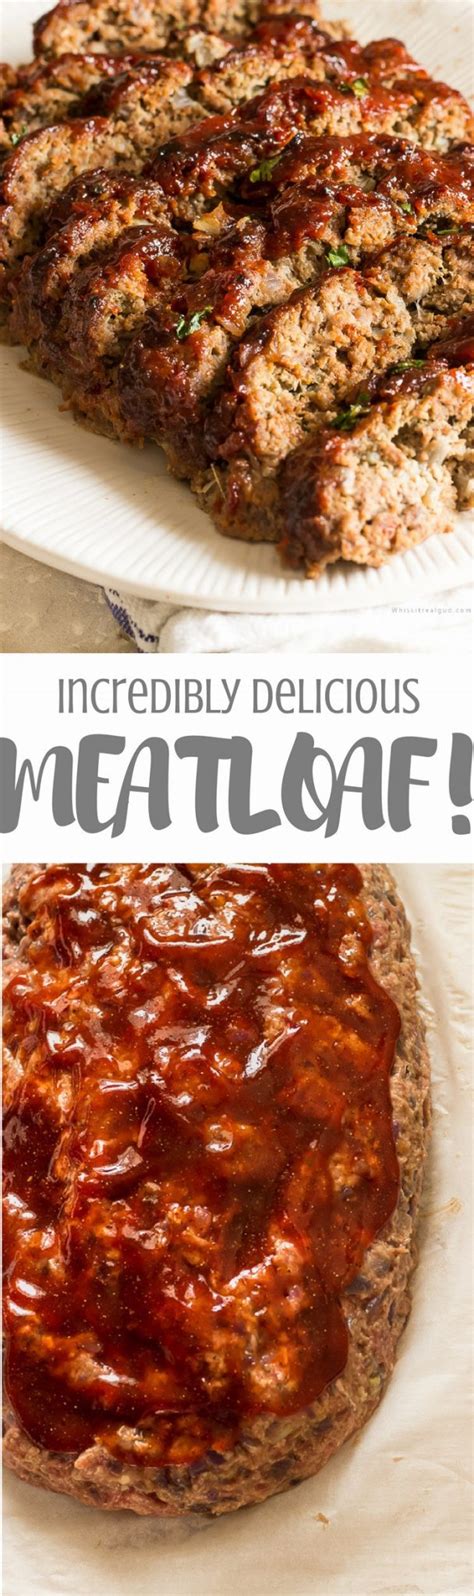 May 14, 2021 · bake in preheated oven for about 1 hour and 15 minutes; 2 Lb Meatloaf Recipe / Meatloaf with Stuffing is a tasty 2 ...